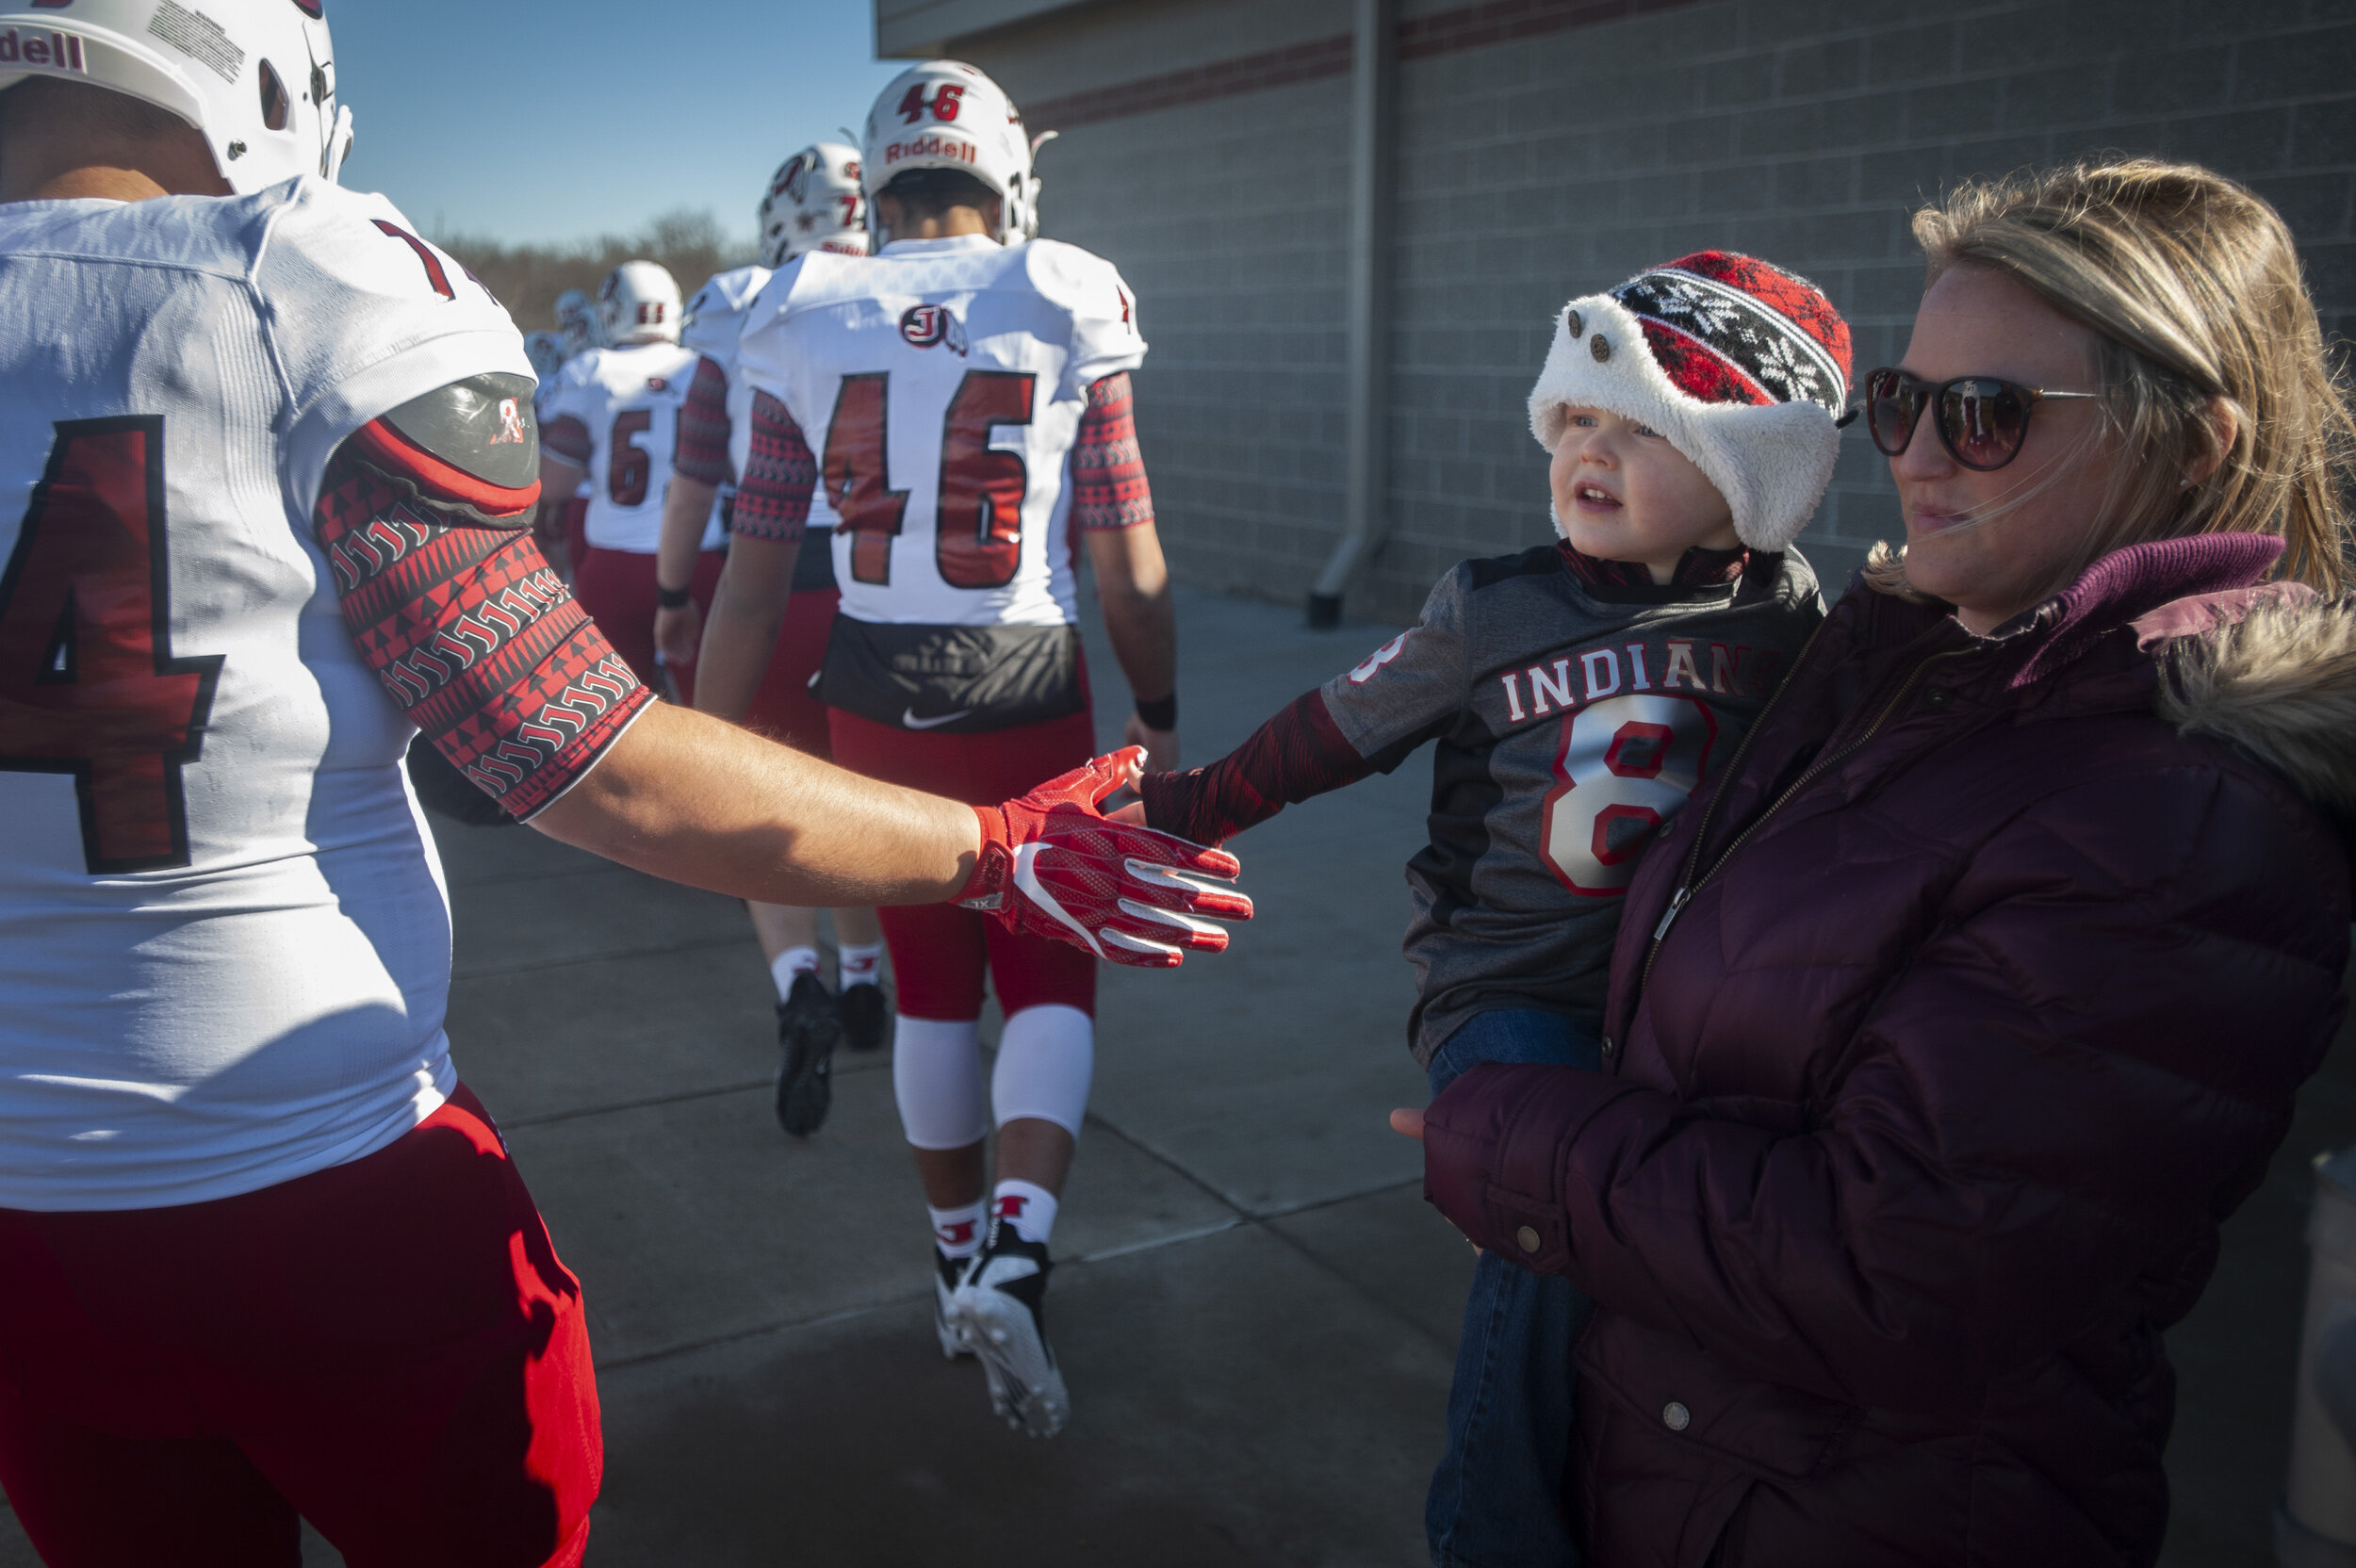  While held by his mother Jessica Bardot of Jackson, Liam Bardot, 3, high fives Jackson's Noah Gibson (74) before the Jackson Indians' 20-7 victory over Staley High School in the MSHSAA Class 5 state semifinals Saturday, Nov. 30, 2019, in Kansas City